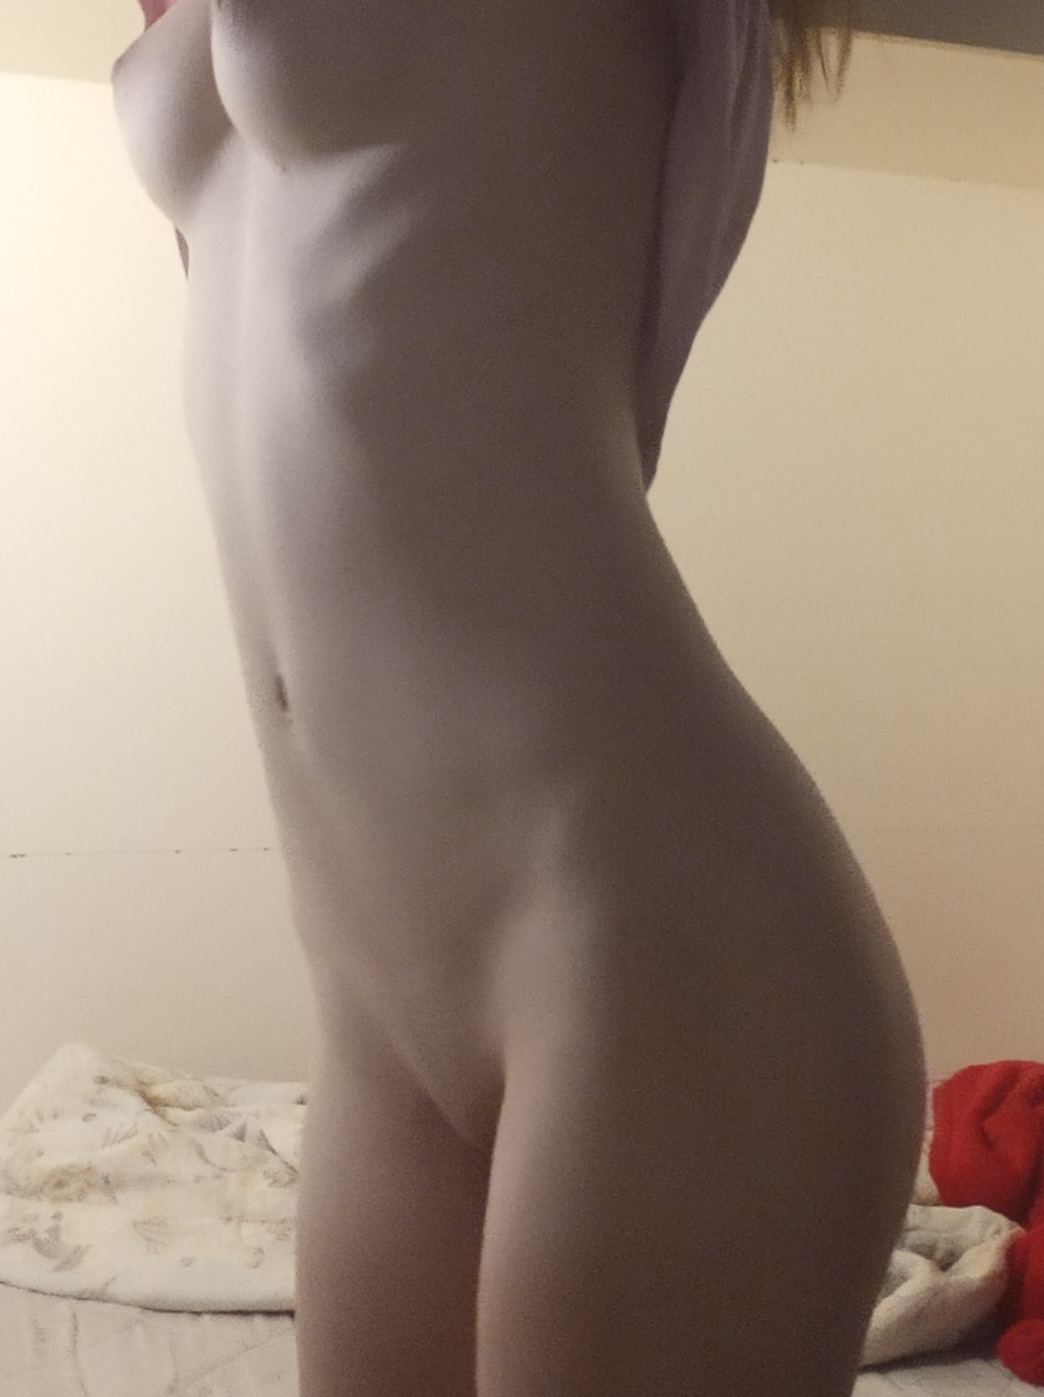 I Bet I Can Make You Cum In 10 Mins, What Do You Think?